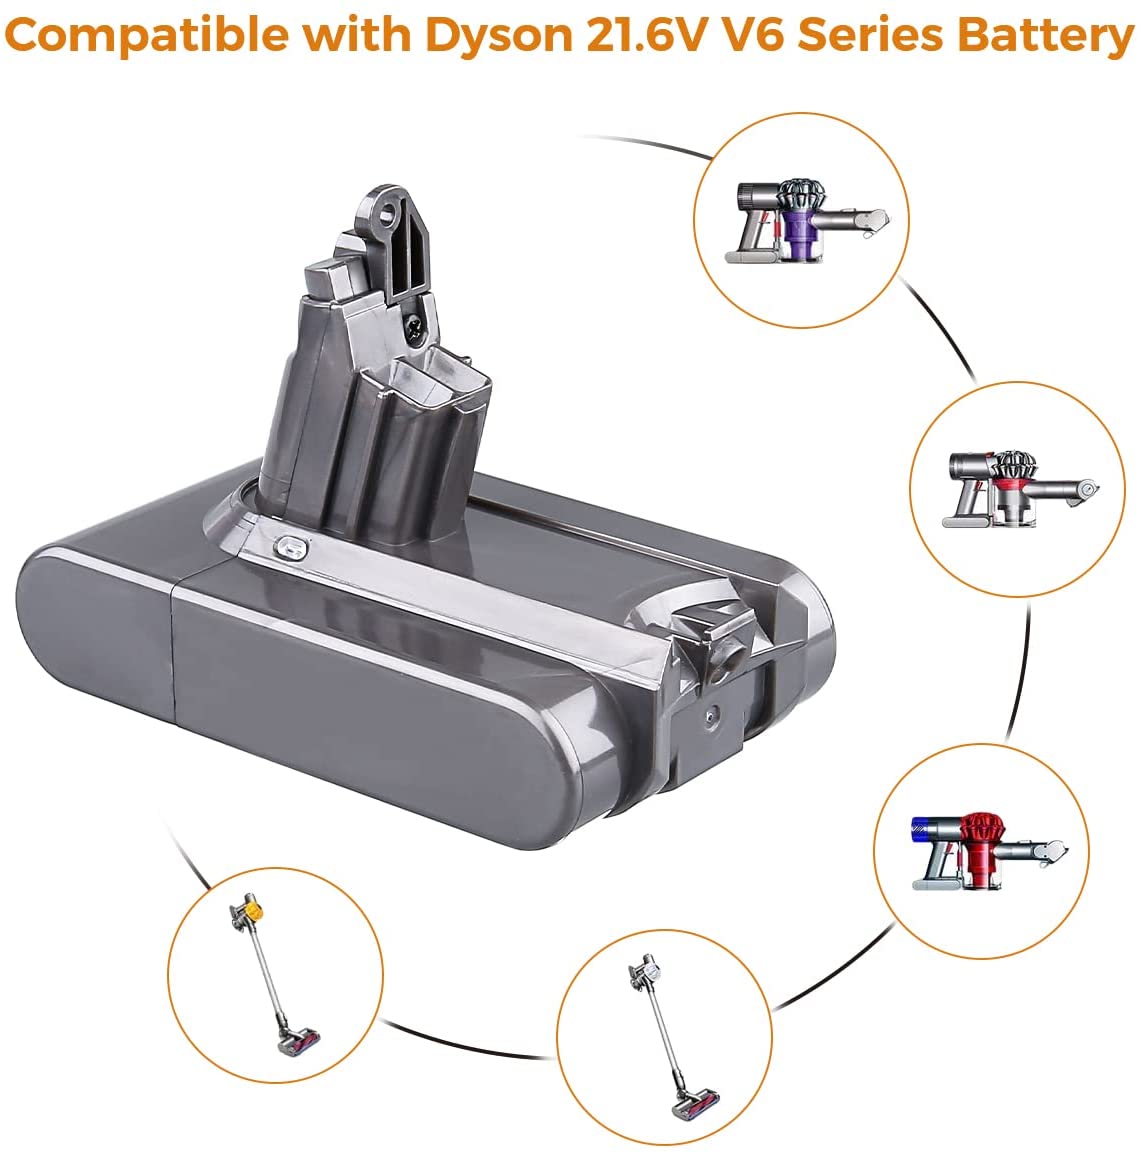 For Dyson 21.6V Battery Replacement 4Ah | Battery For Dyson V6 SV04 SV09 DC59 DC62 DC61 DC58